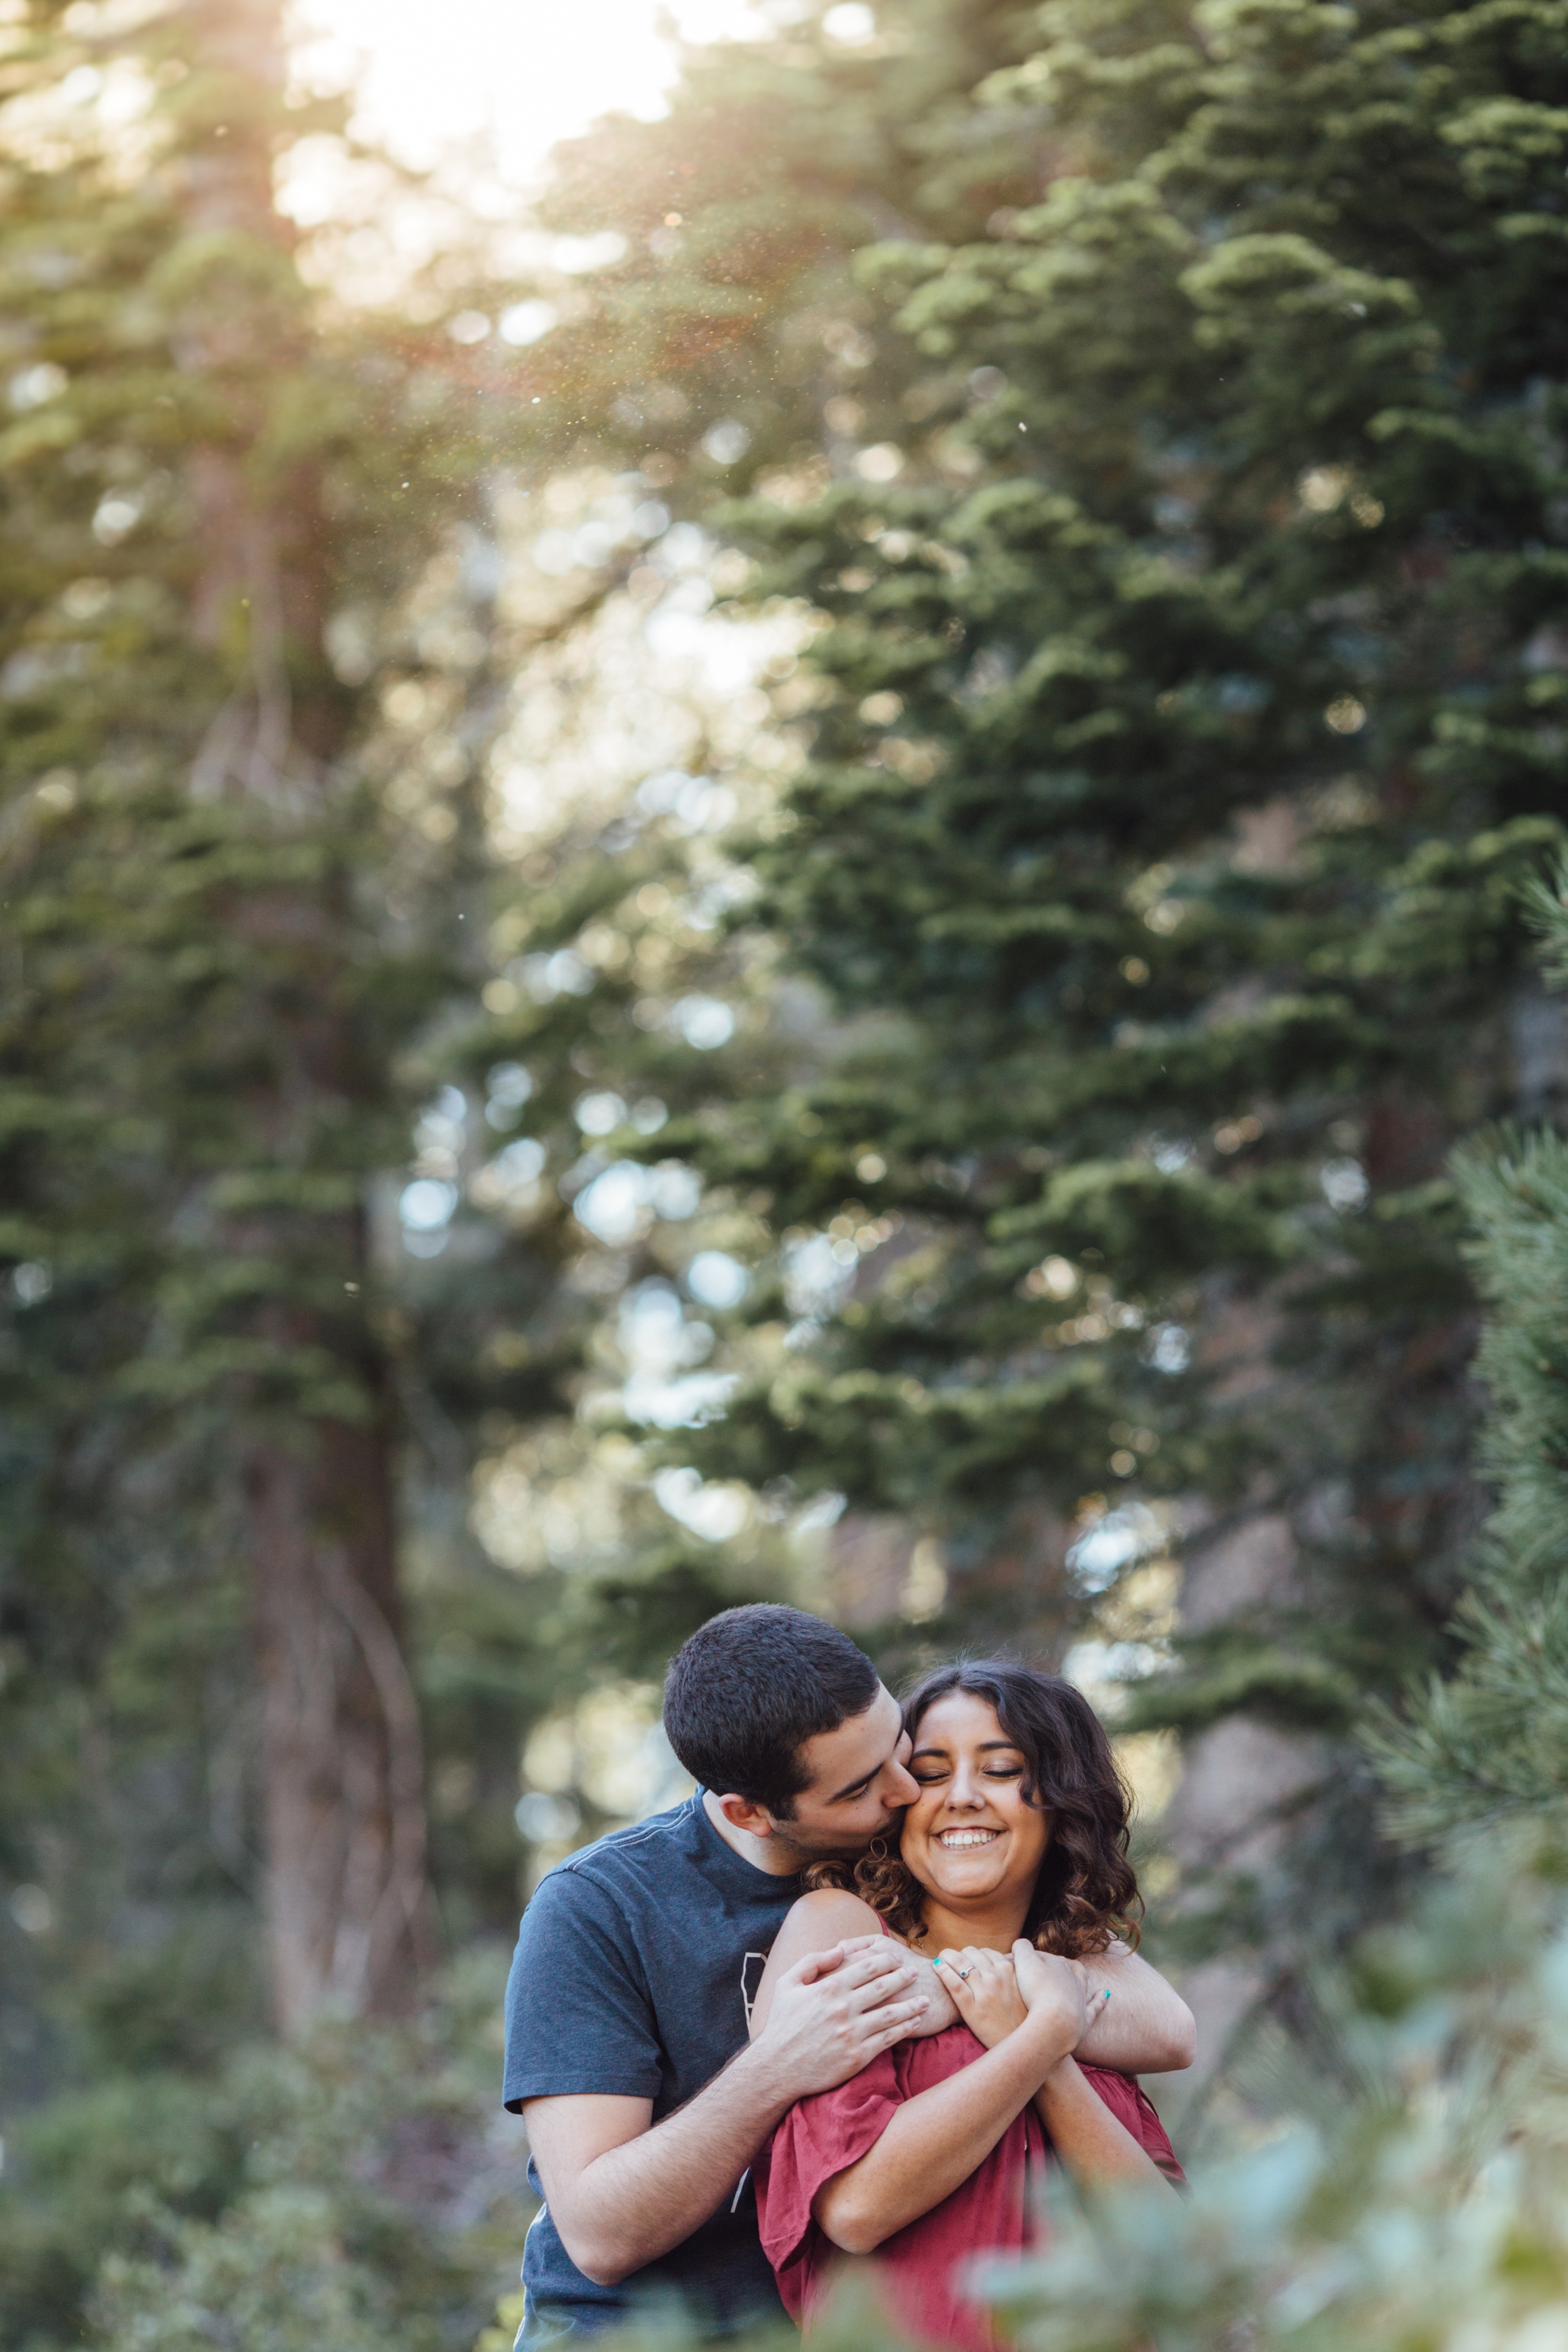 thedelauras_ostaraphotography_laketahoeengagement_laketahoeweddingphotograph_laketahoe_photographer_003